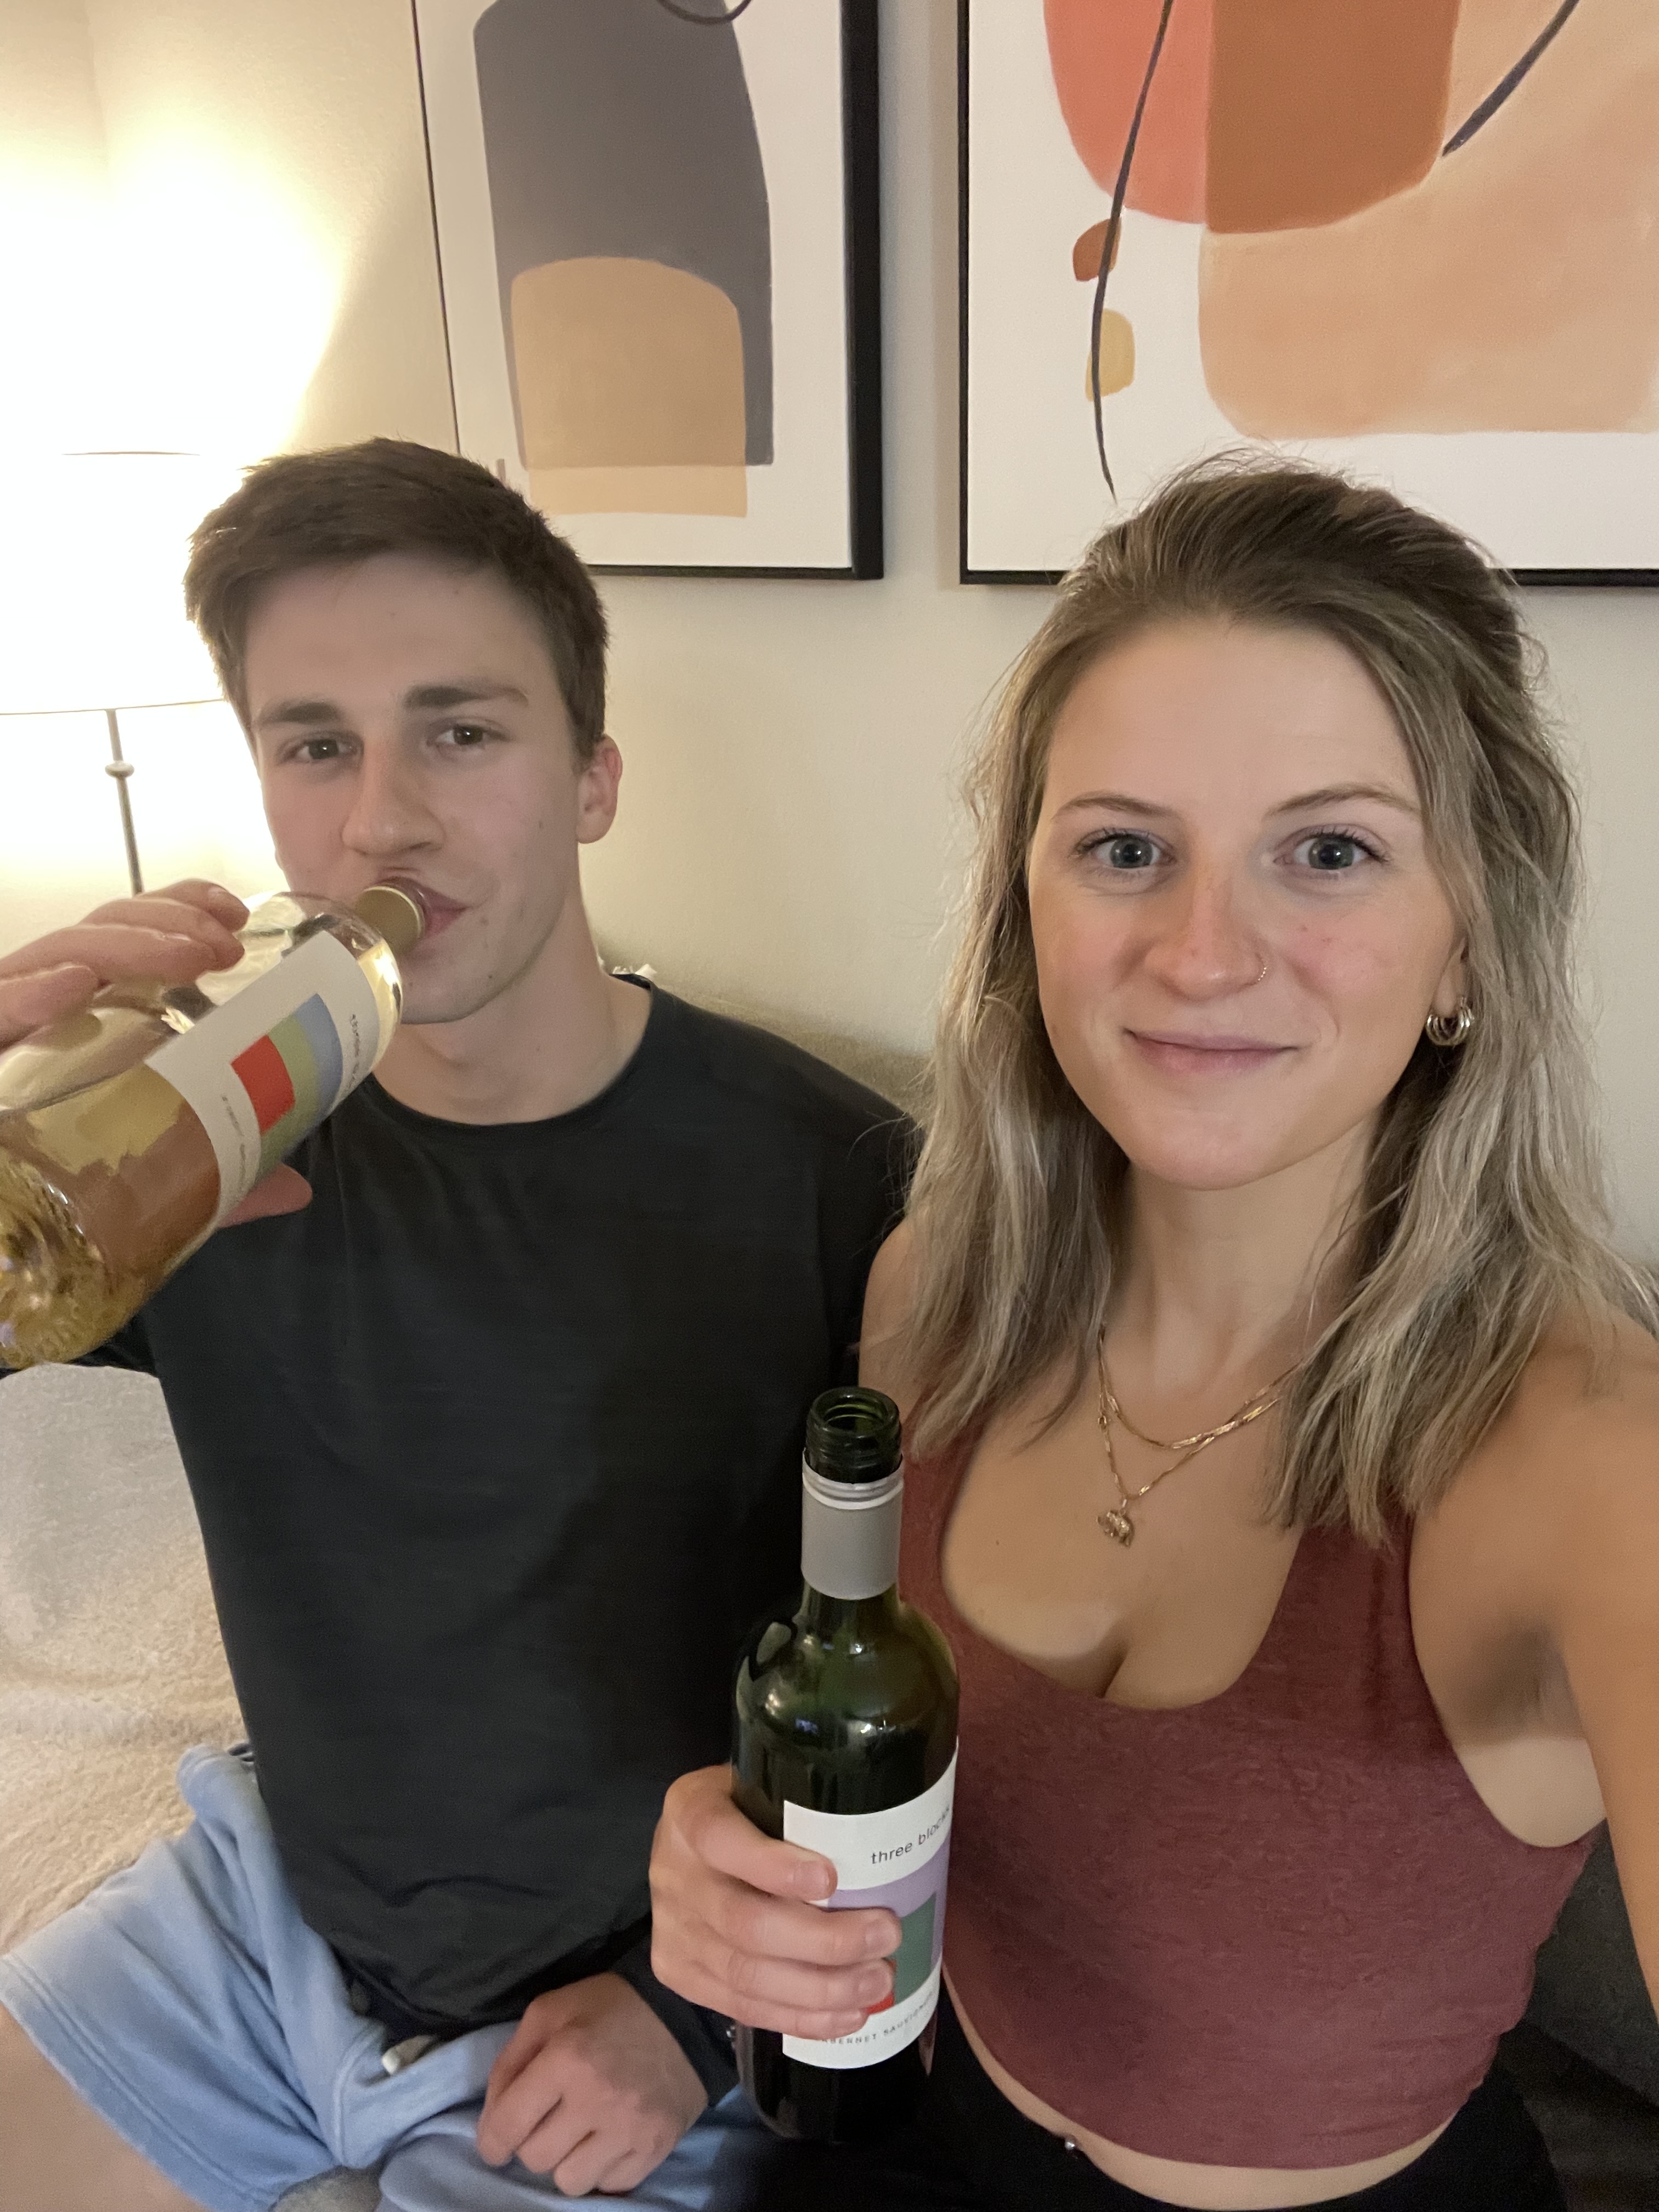 Man and woman smiling, holding wine bottles, casual attire indoors